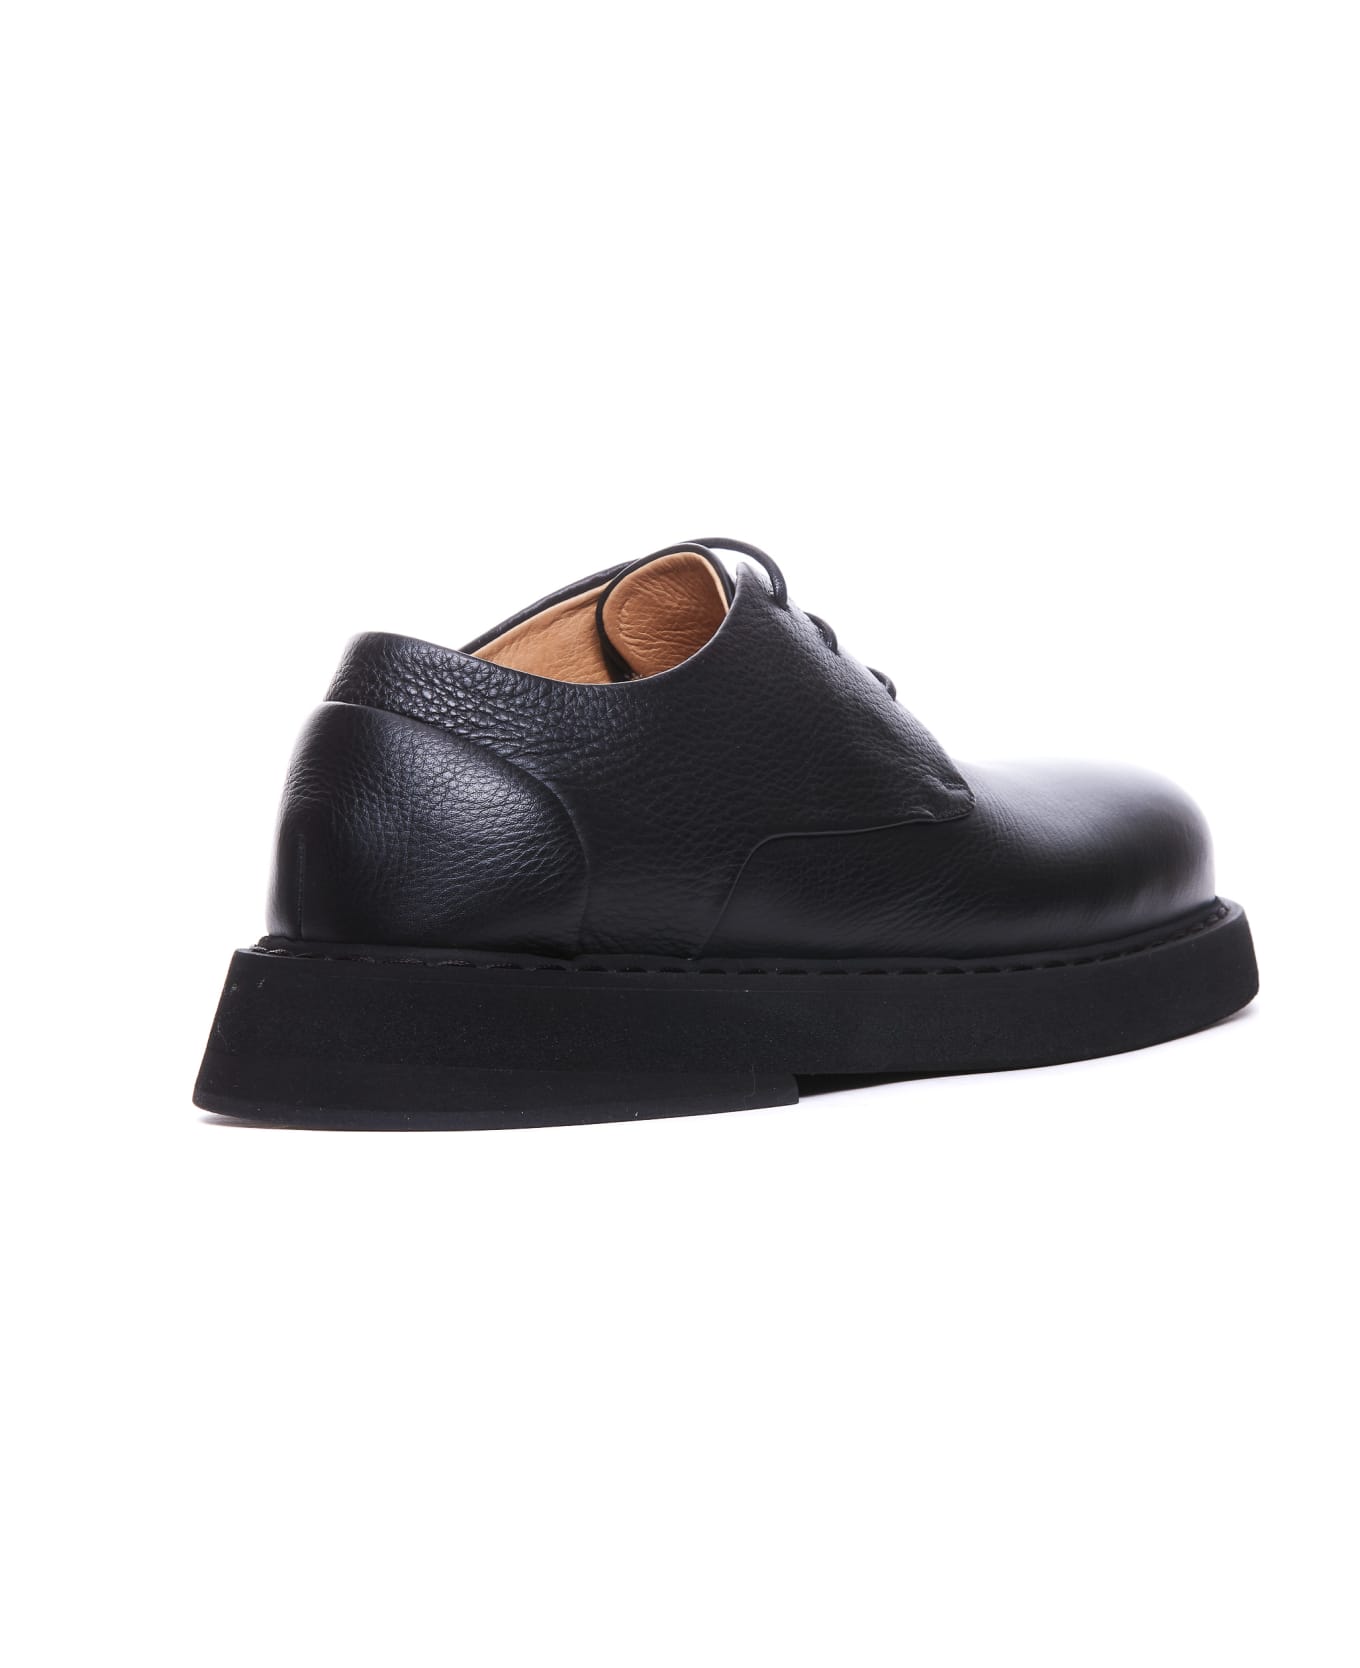 Marsell Spalla Derby Laced Up Shoes - Black